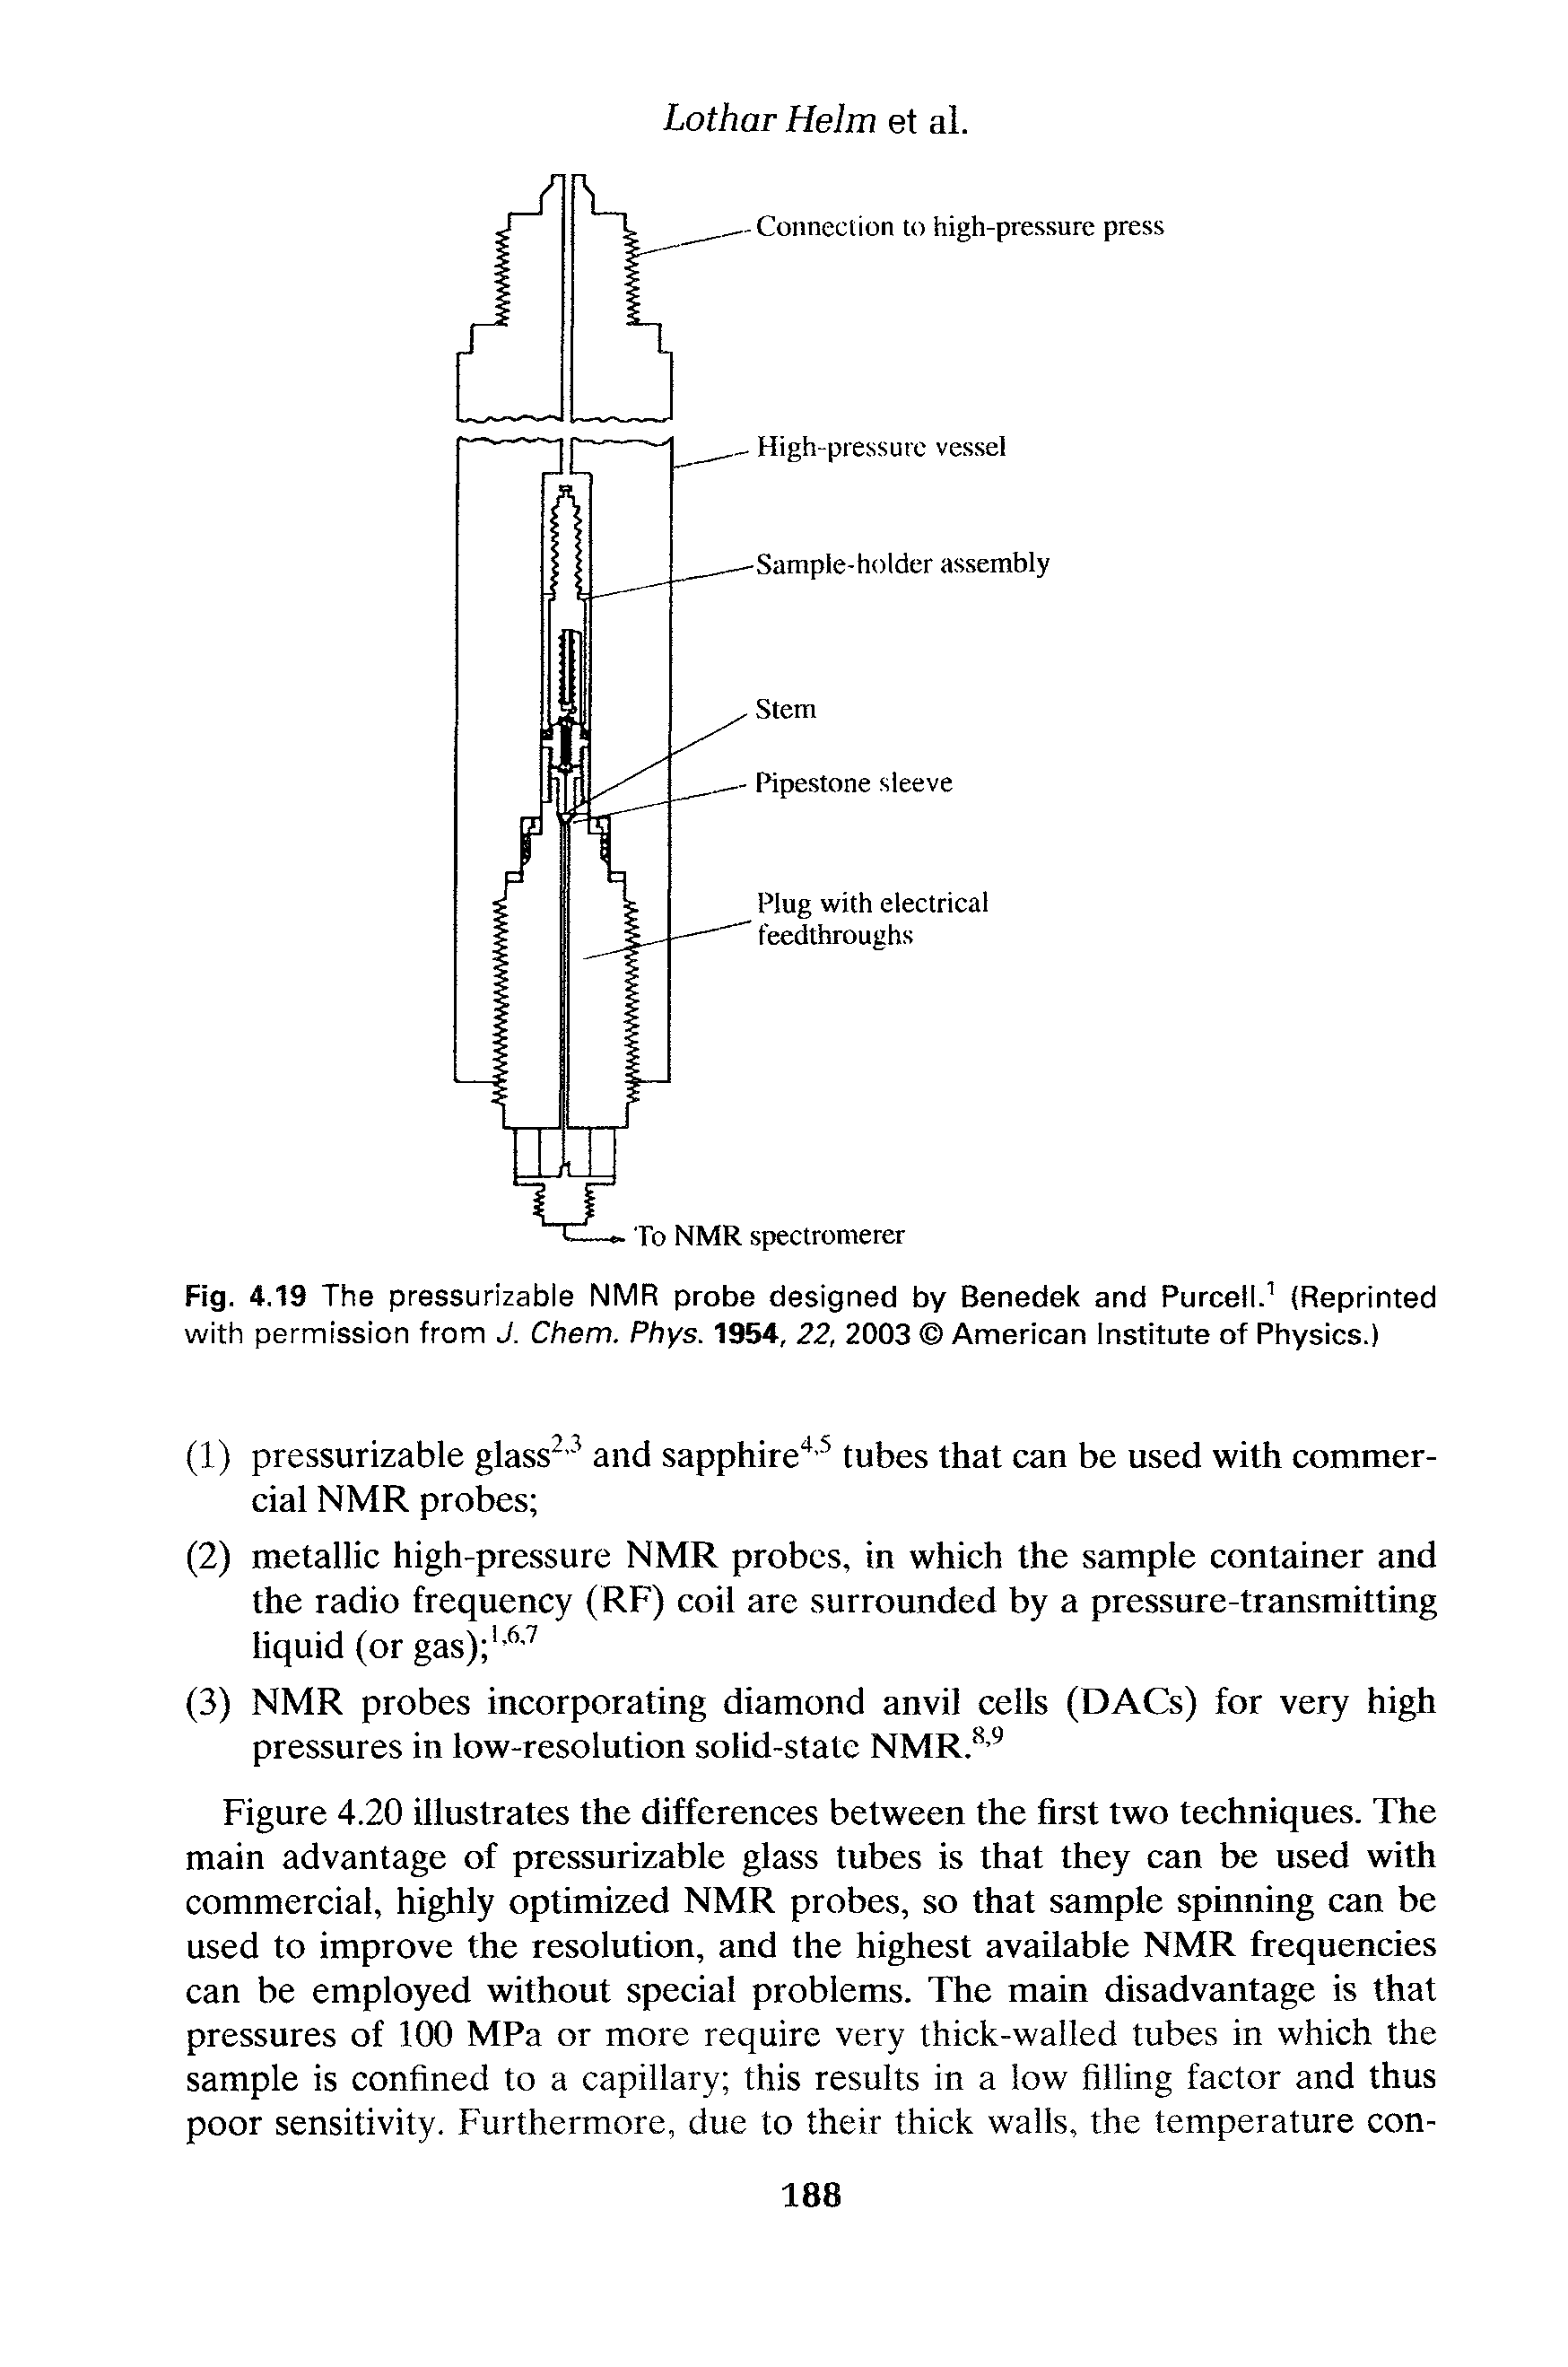 Fig. 4.19 The pressurizabie NMR probe designed by Benedek and Purcell. (Reprinted with permission from J. Chem. Phys. 1954, 22, 2003 American Institute of Physics.)...